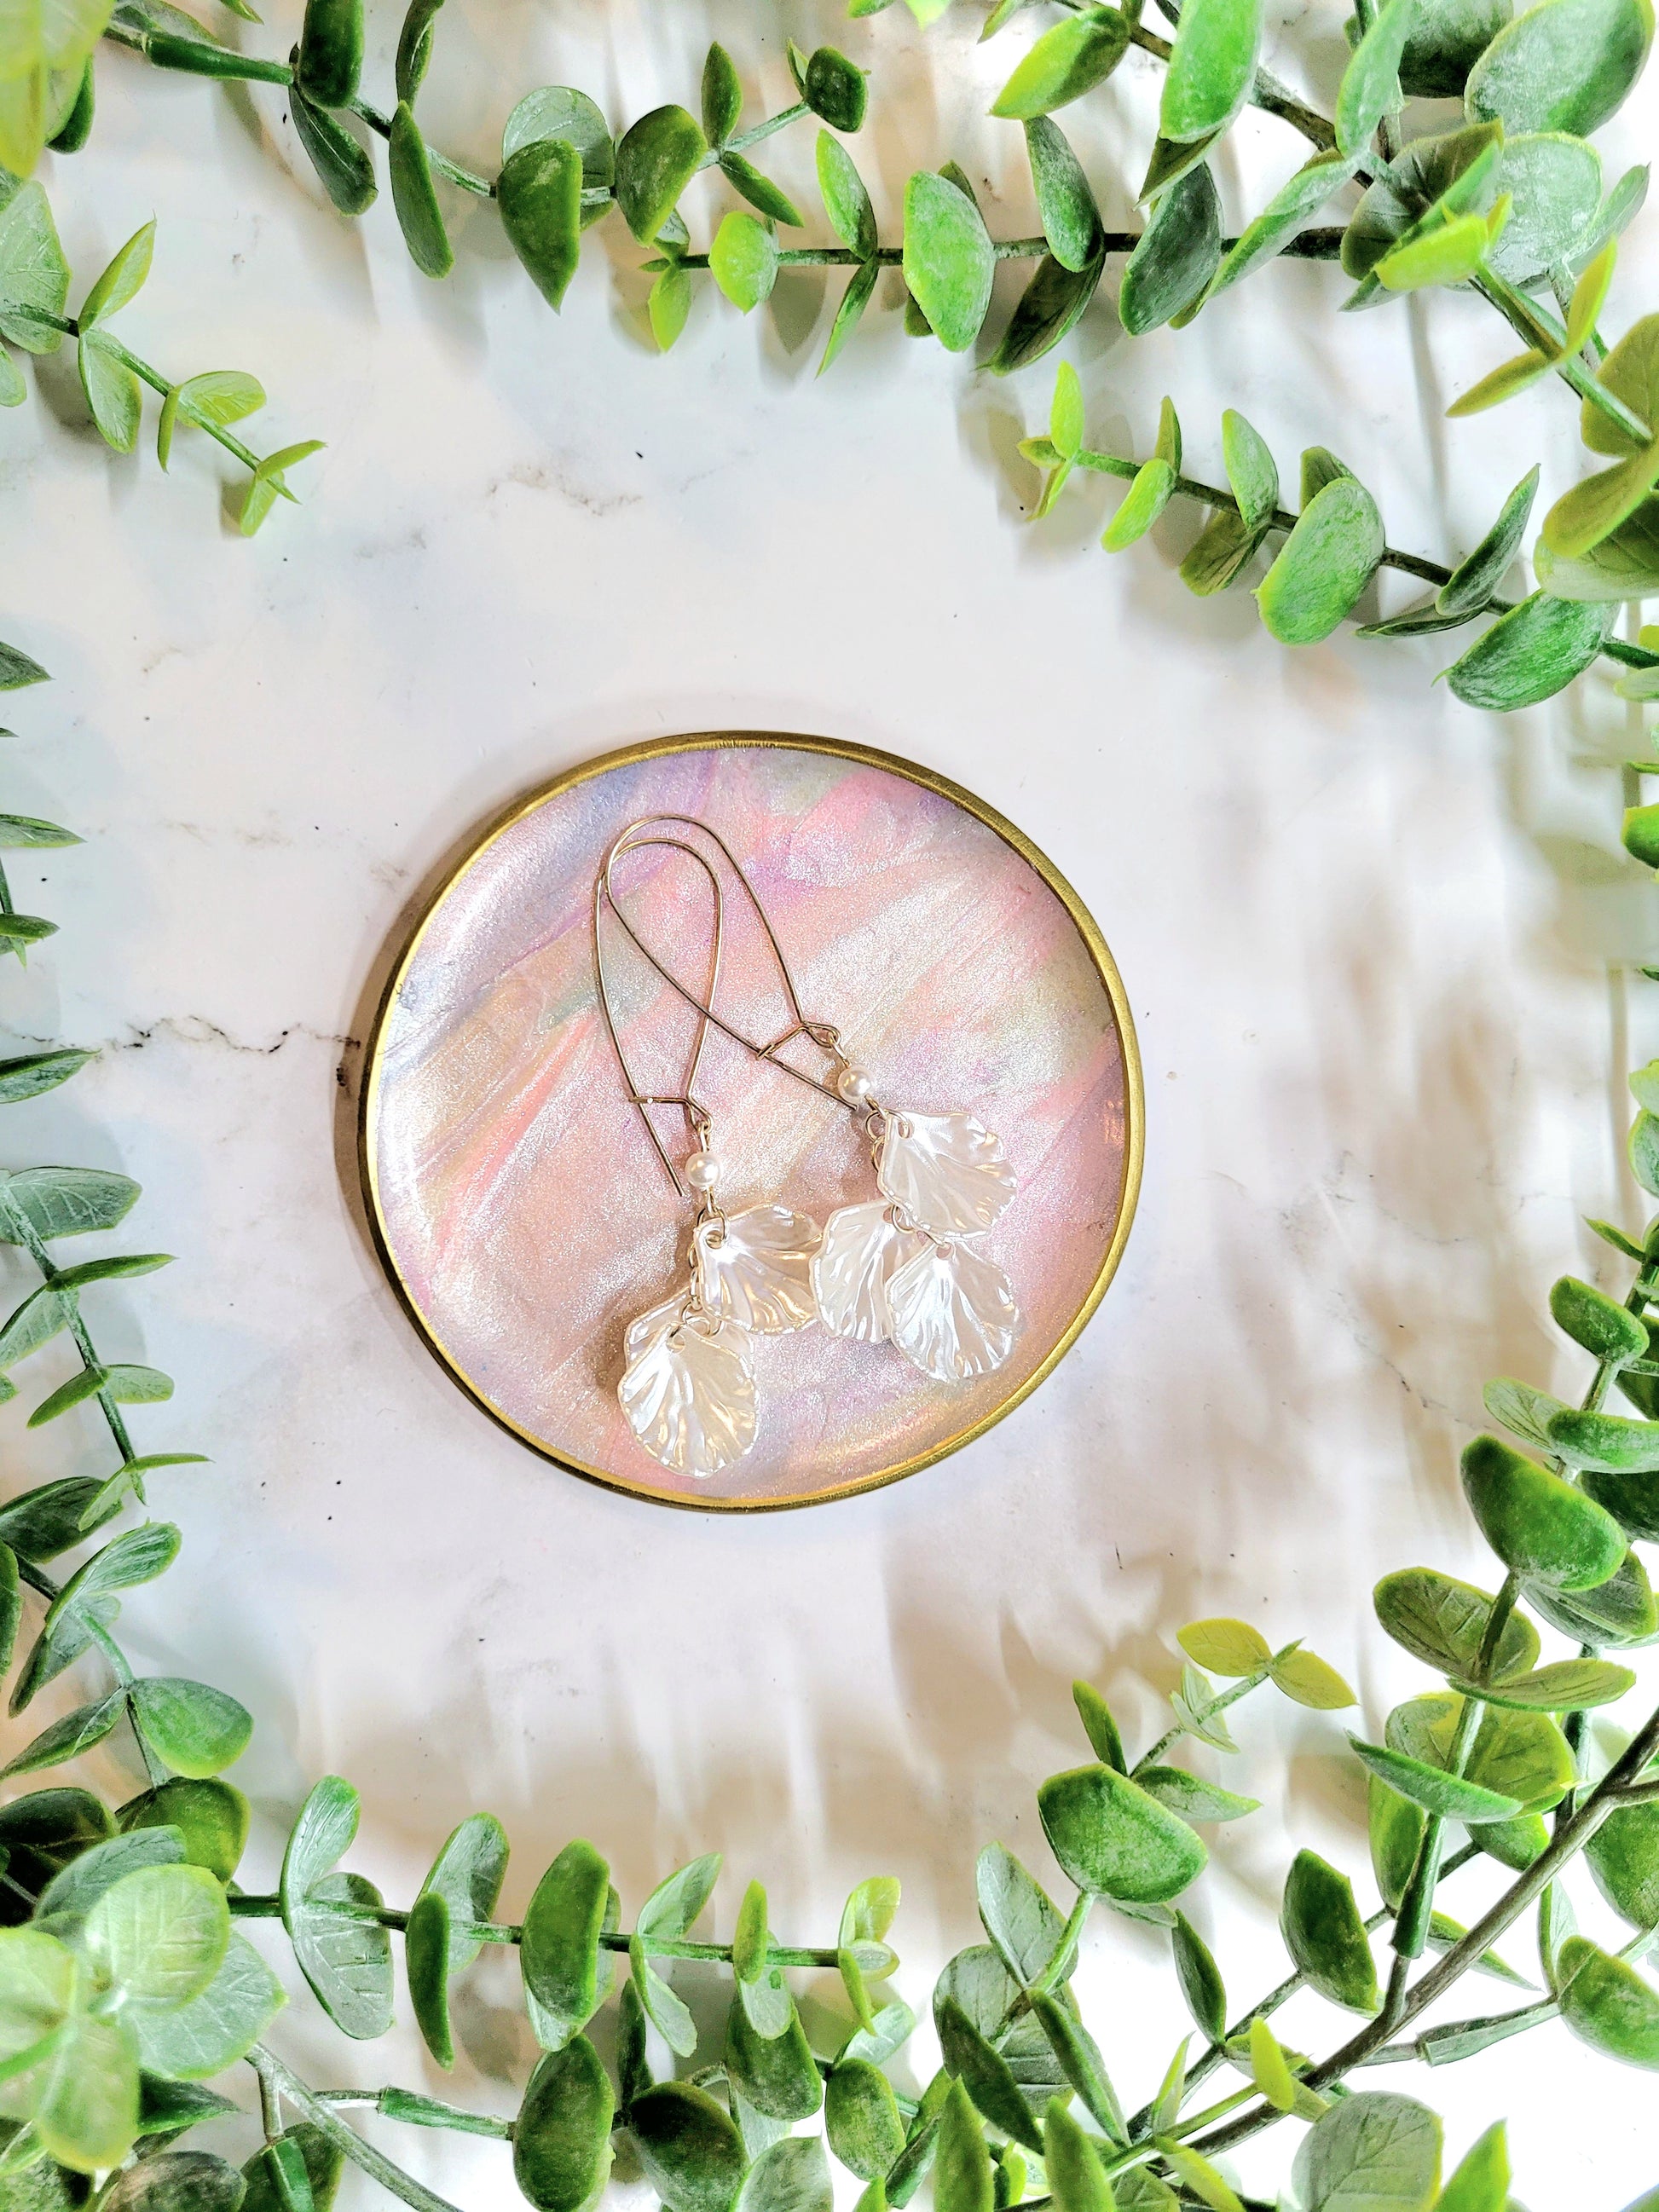 faux mother of pearl trinket dish with gold detailing holding a pair of shell earrringson a marble background surrounded by foliage.